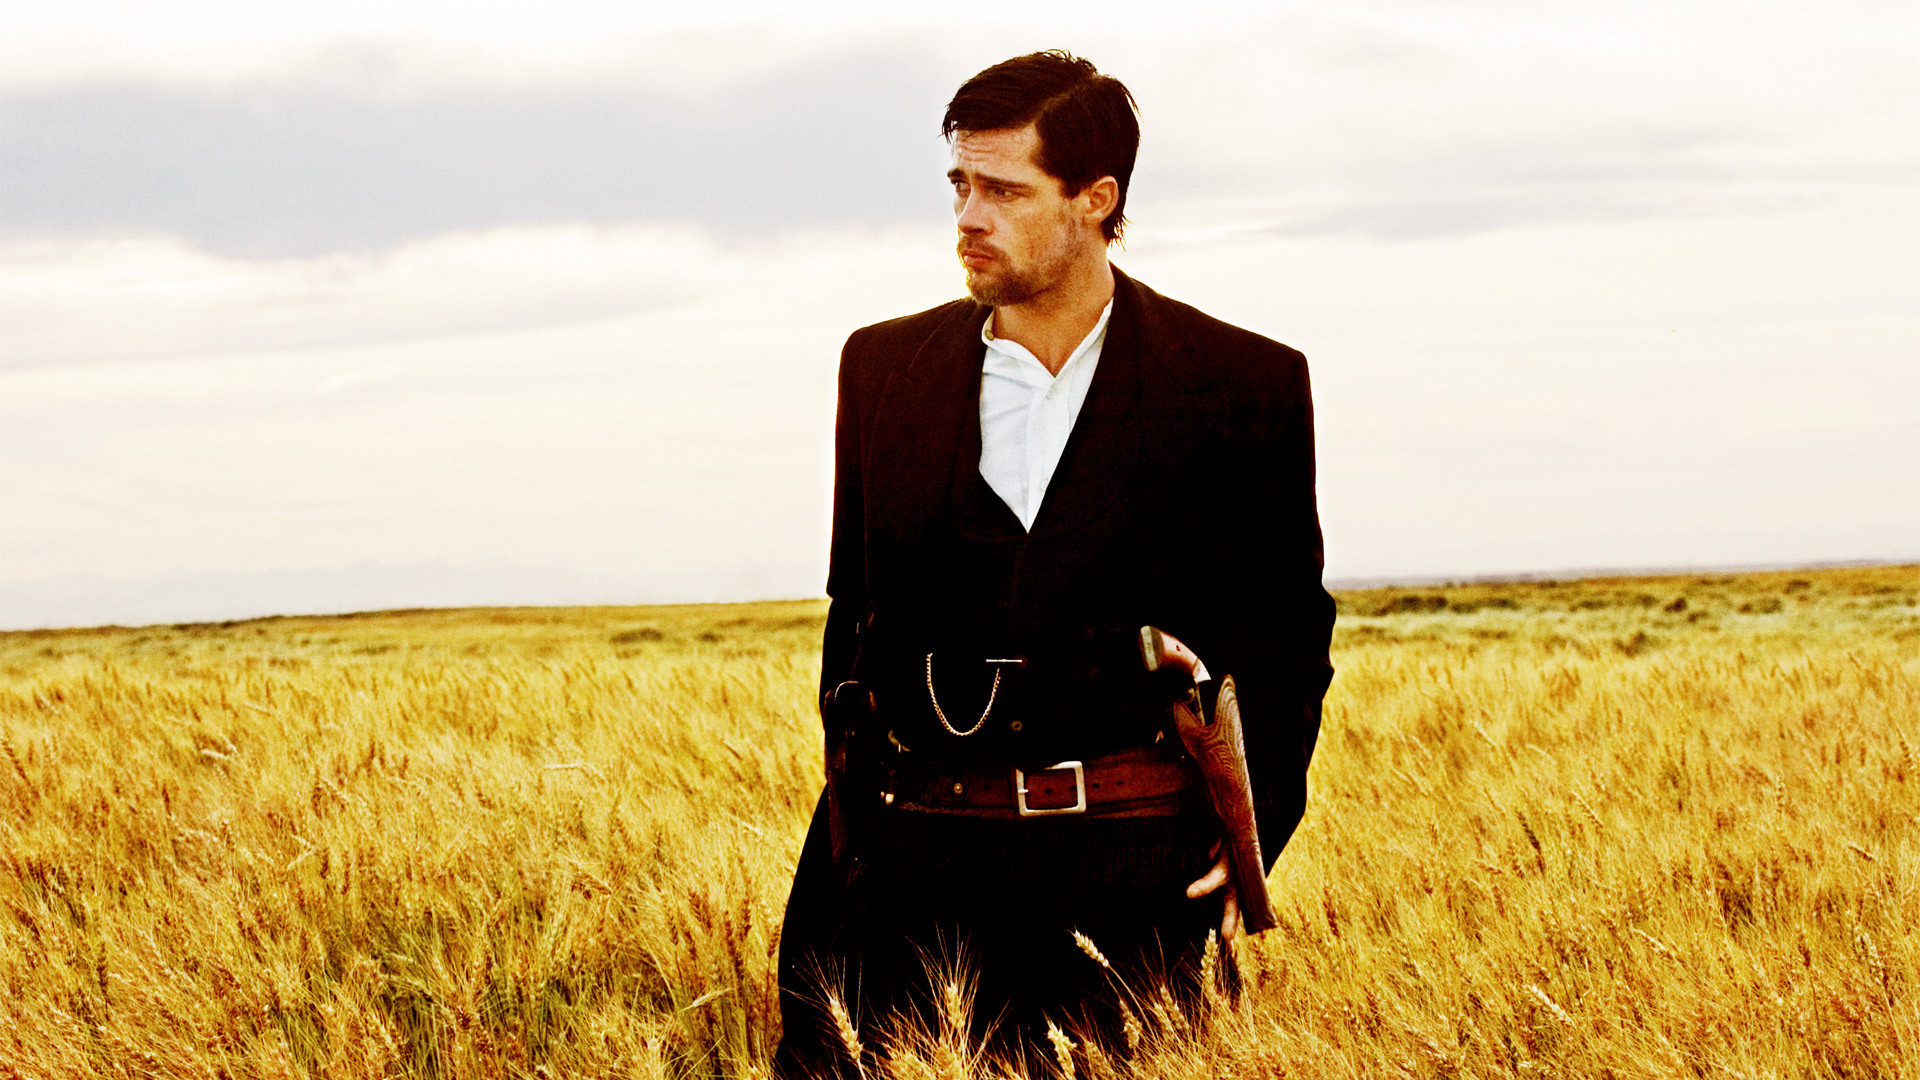 Movie The Assassination of Jesse James by the Coward Robert Ford HD Wallpaper | Background Image